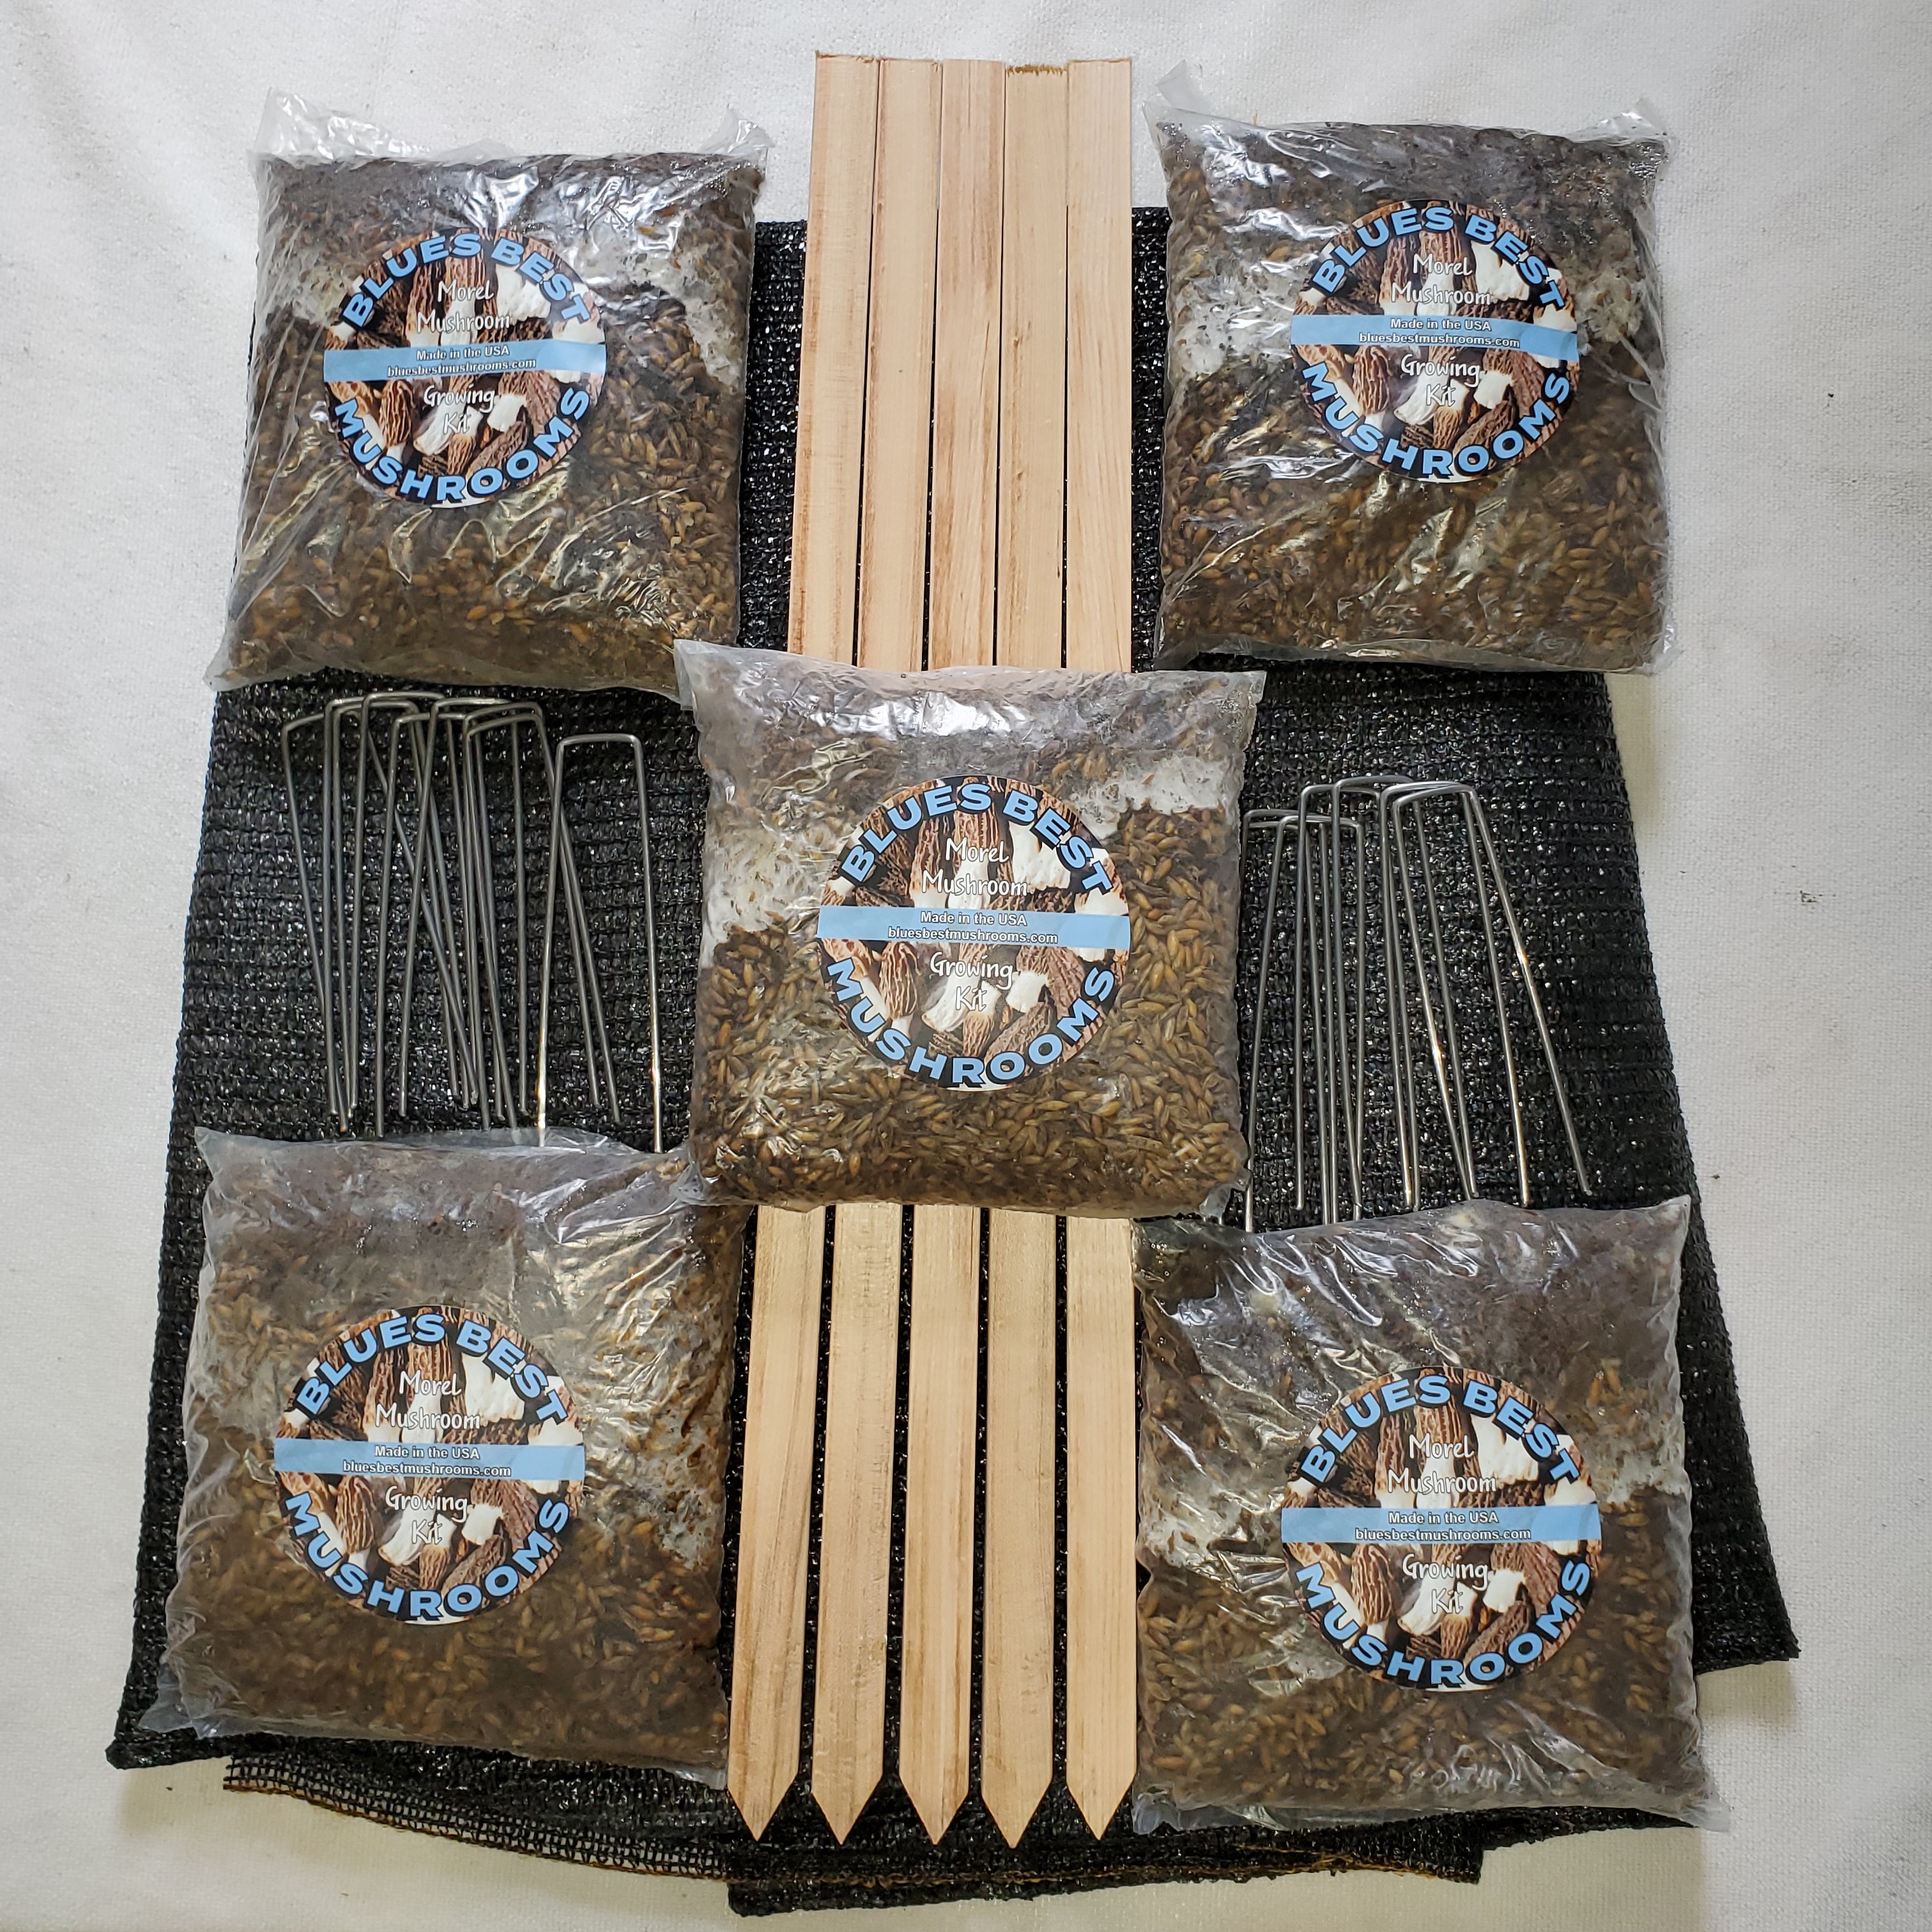 Morel Growing Kit 5 Pack with FREE Protection Package!!!